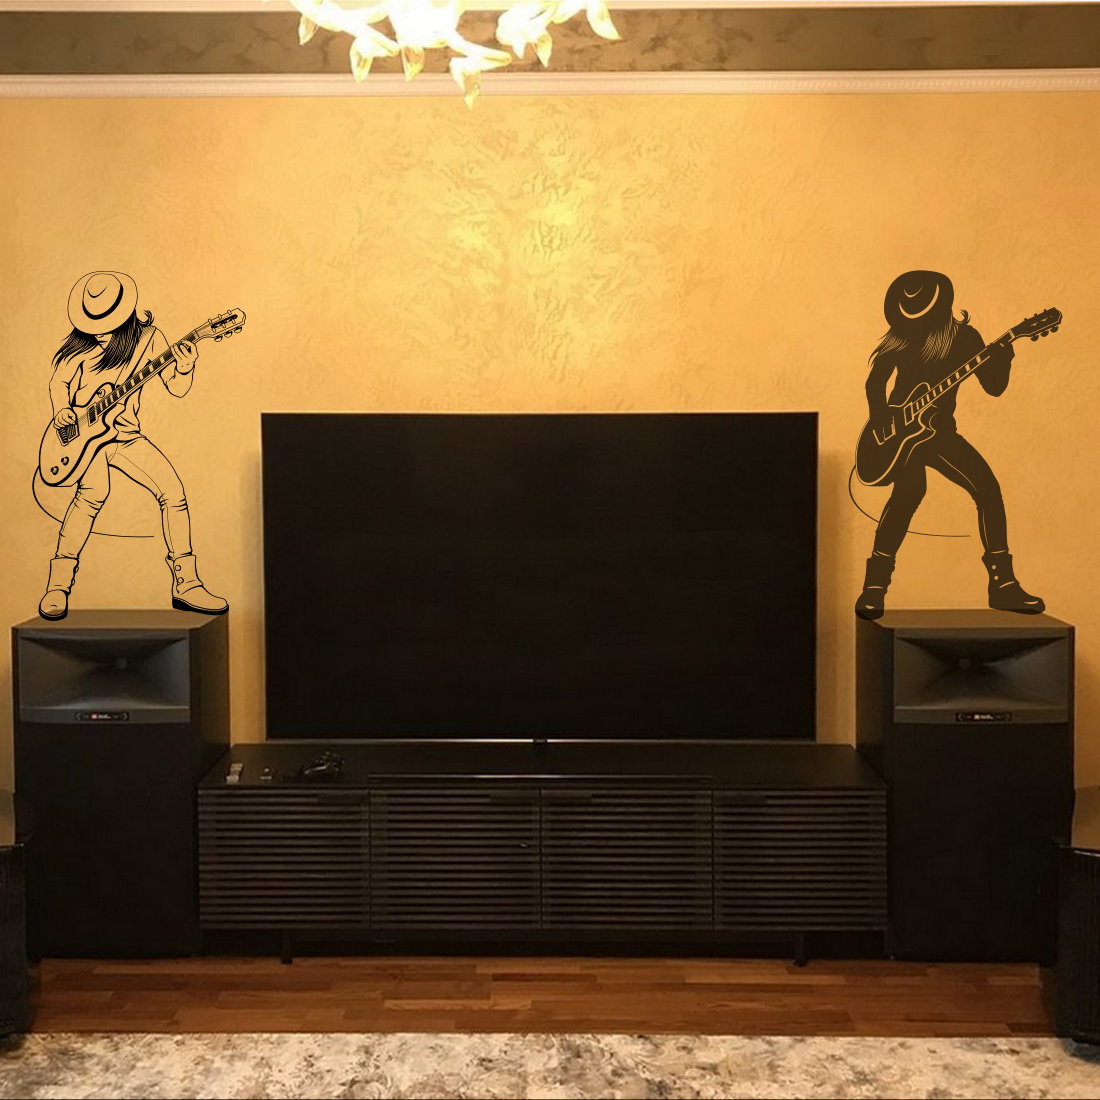 Living room with a tv and a guitar player on the wall.